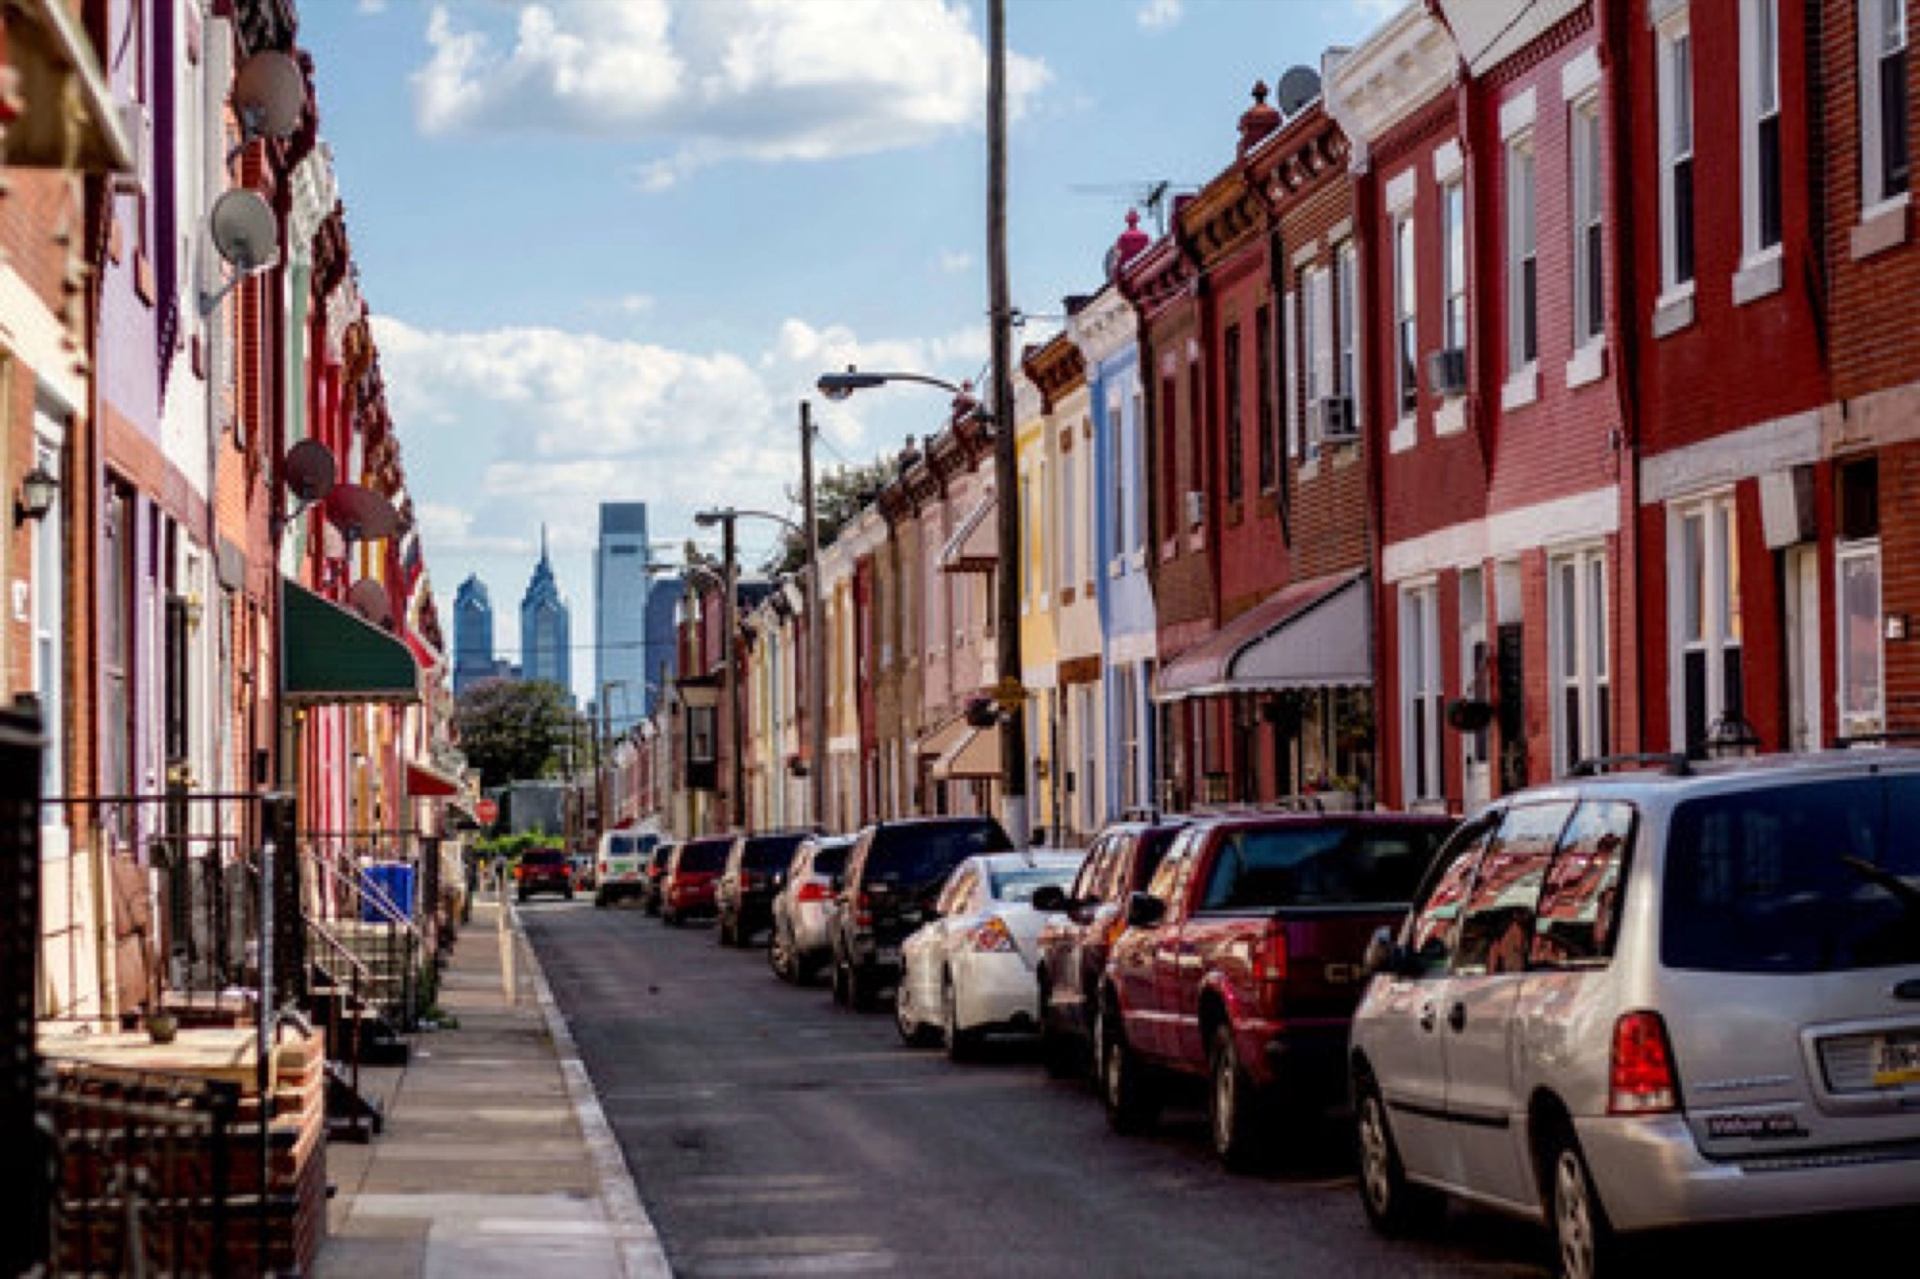 Typical rowhouses in South Philadelphia